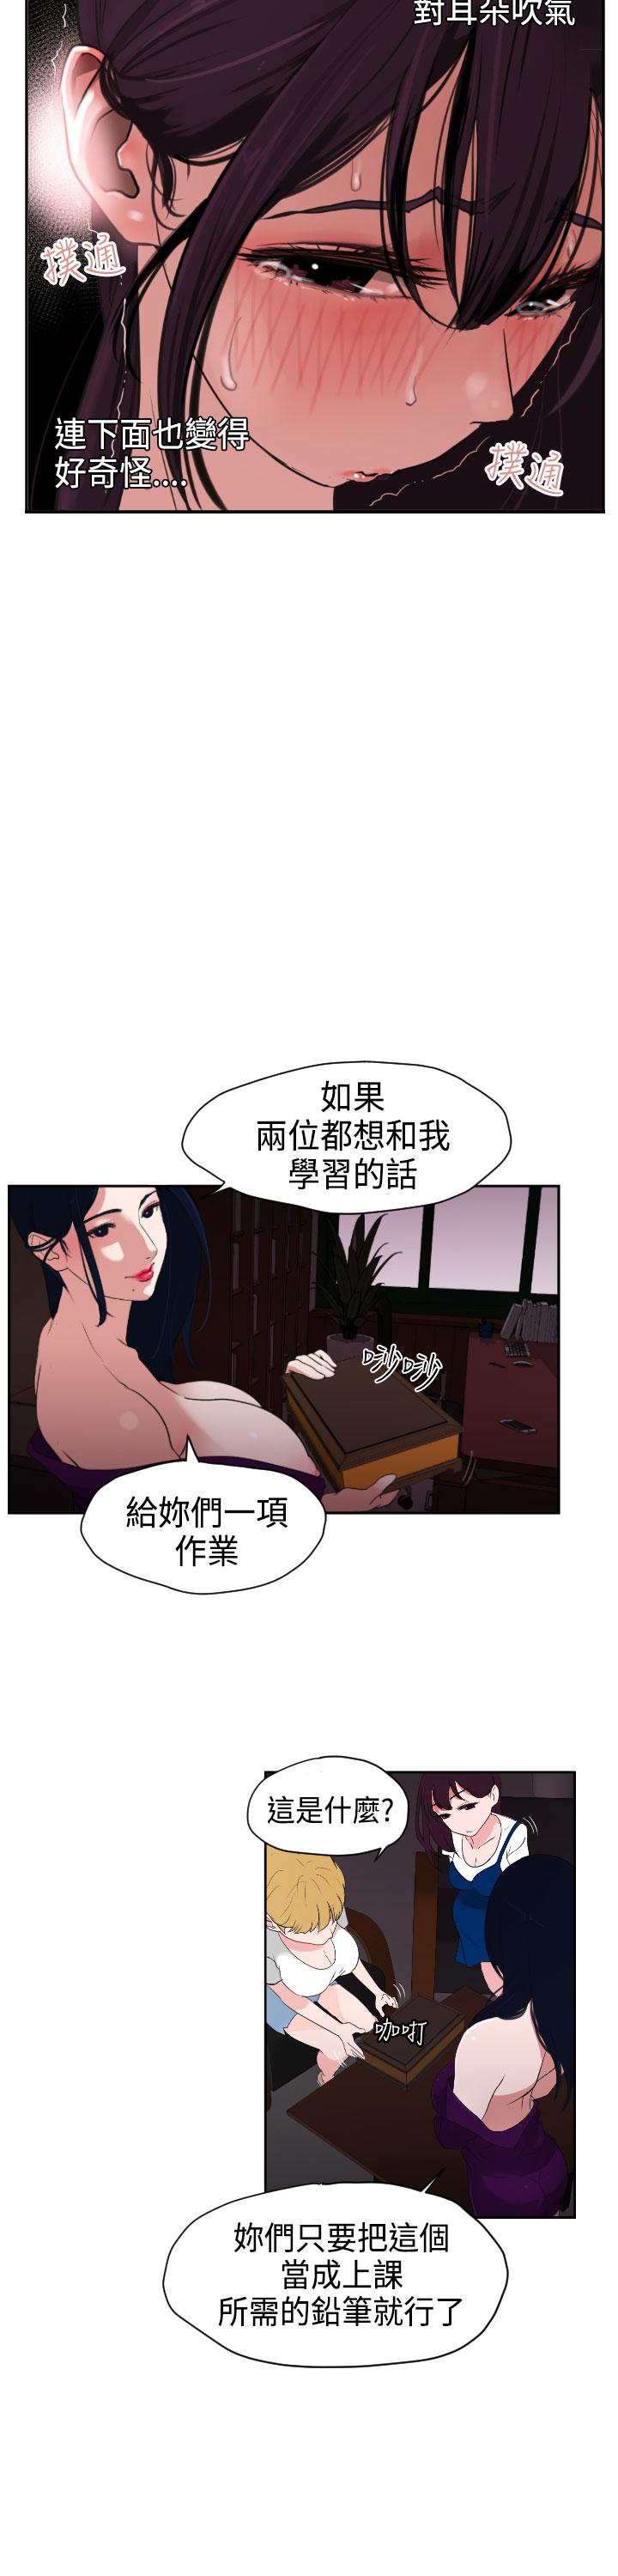 Desire King (慾求王) Ch.1-16 (chinese) 102